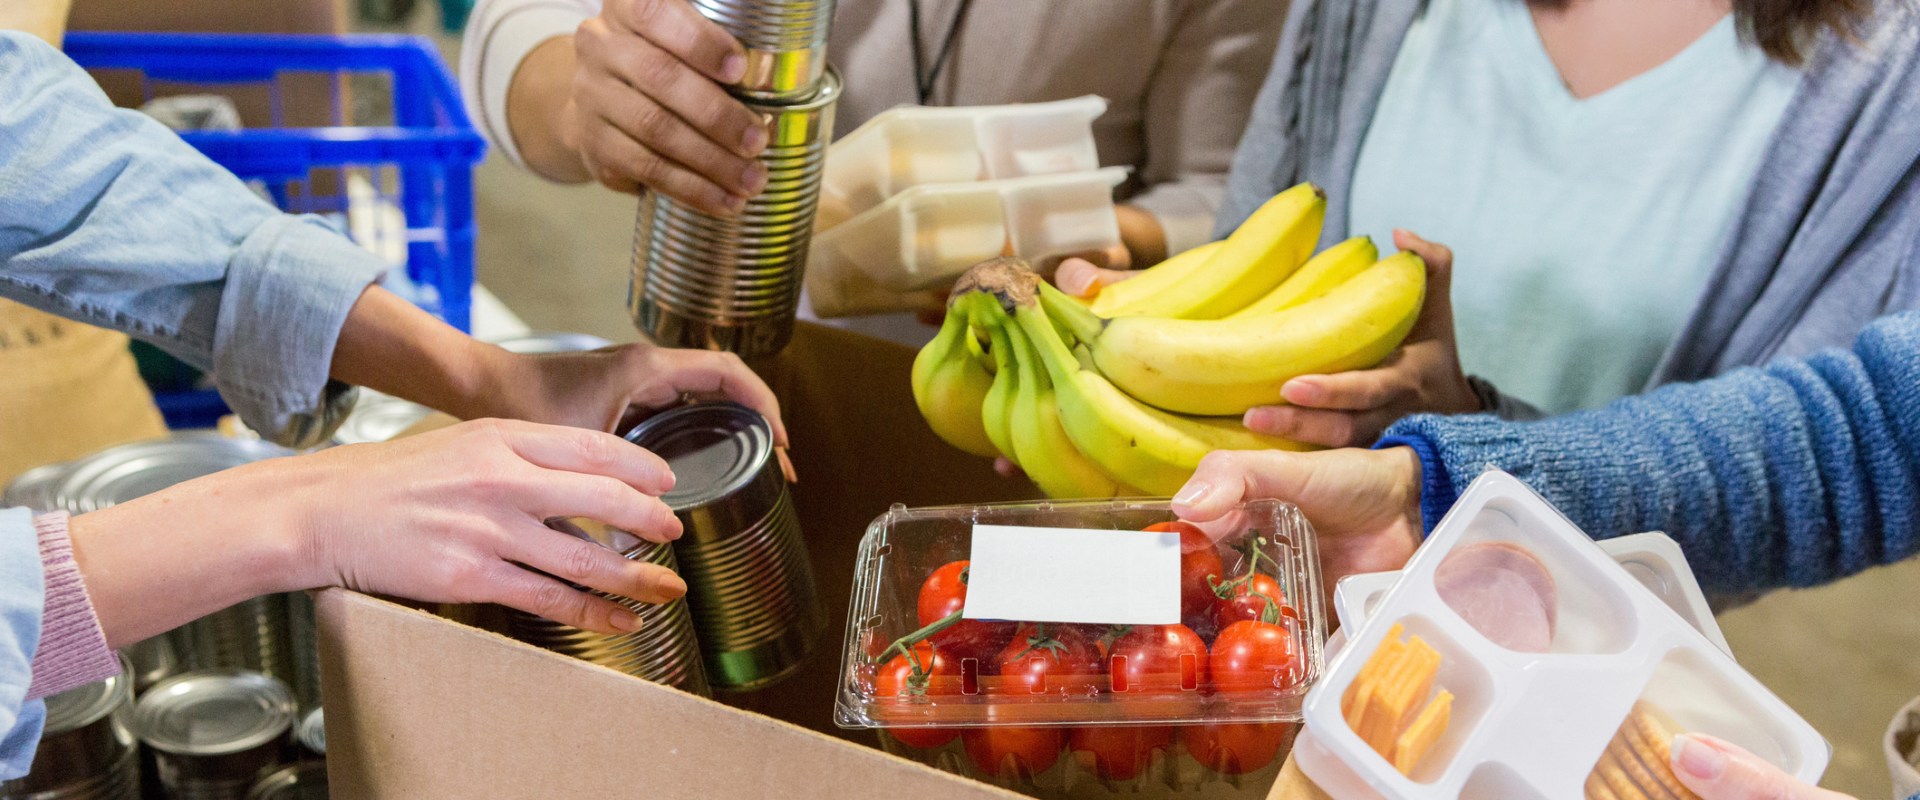 Food Assistance Programs for Citizens in St. Louis, MO: A Comprehensive Guide